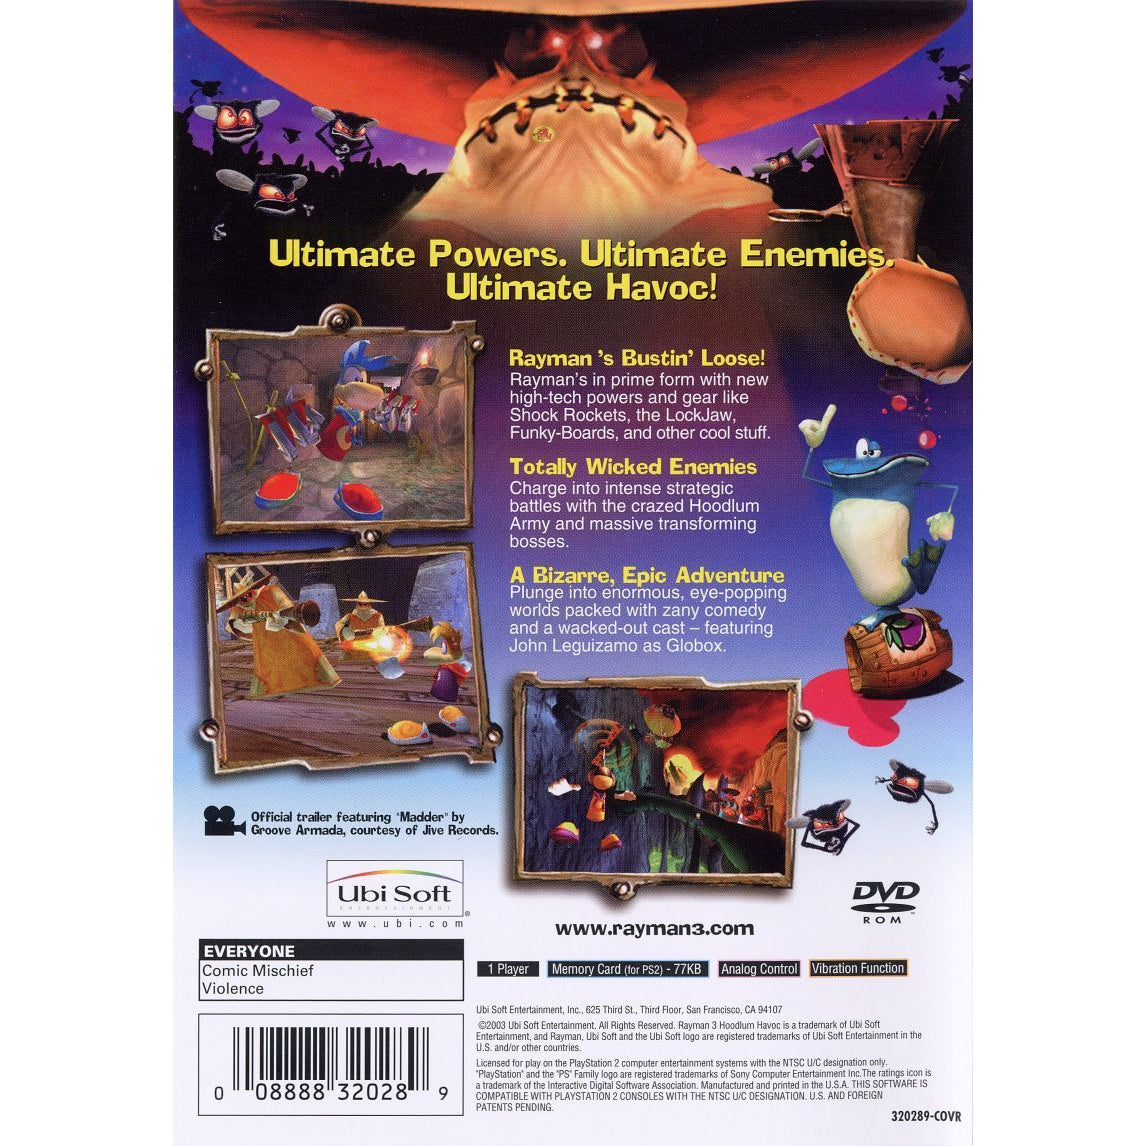 Rayman 3: Hoodlum Havoc - PlayStation 2 (PS2) Game Complete - YourGamingShop.com - Buy, Sell, Trade Video Games Online. 120 Day Warranty. Satisfaction Guaranteed.